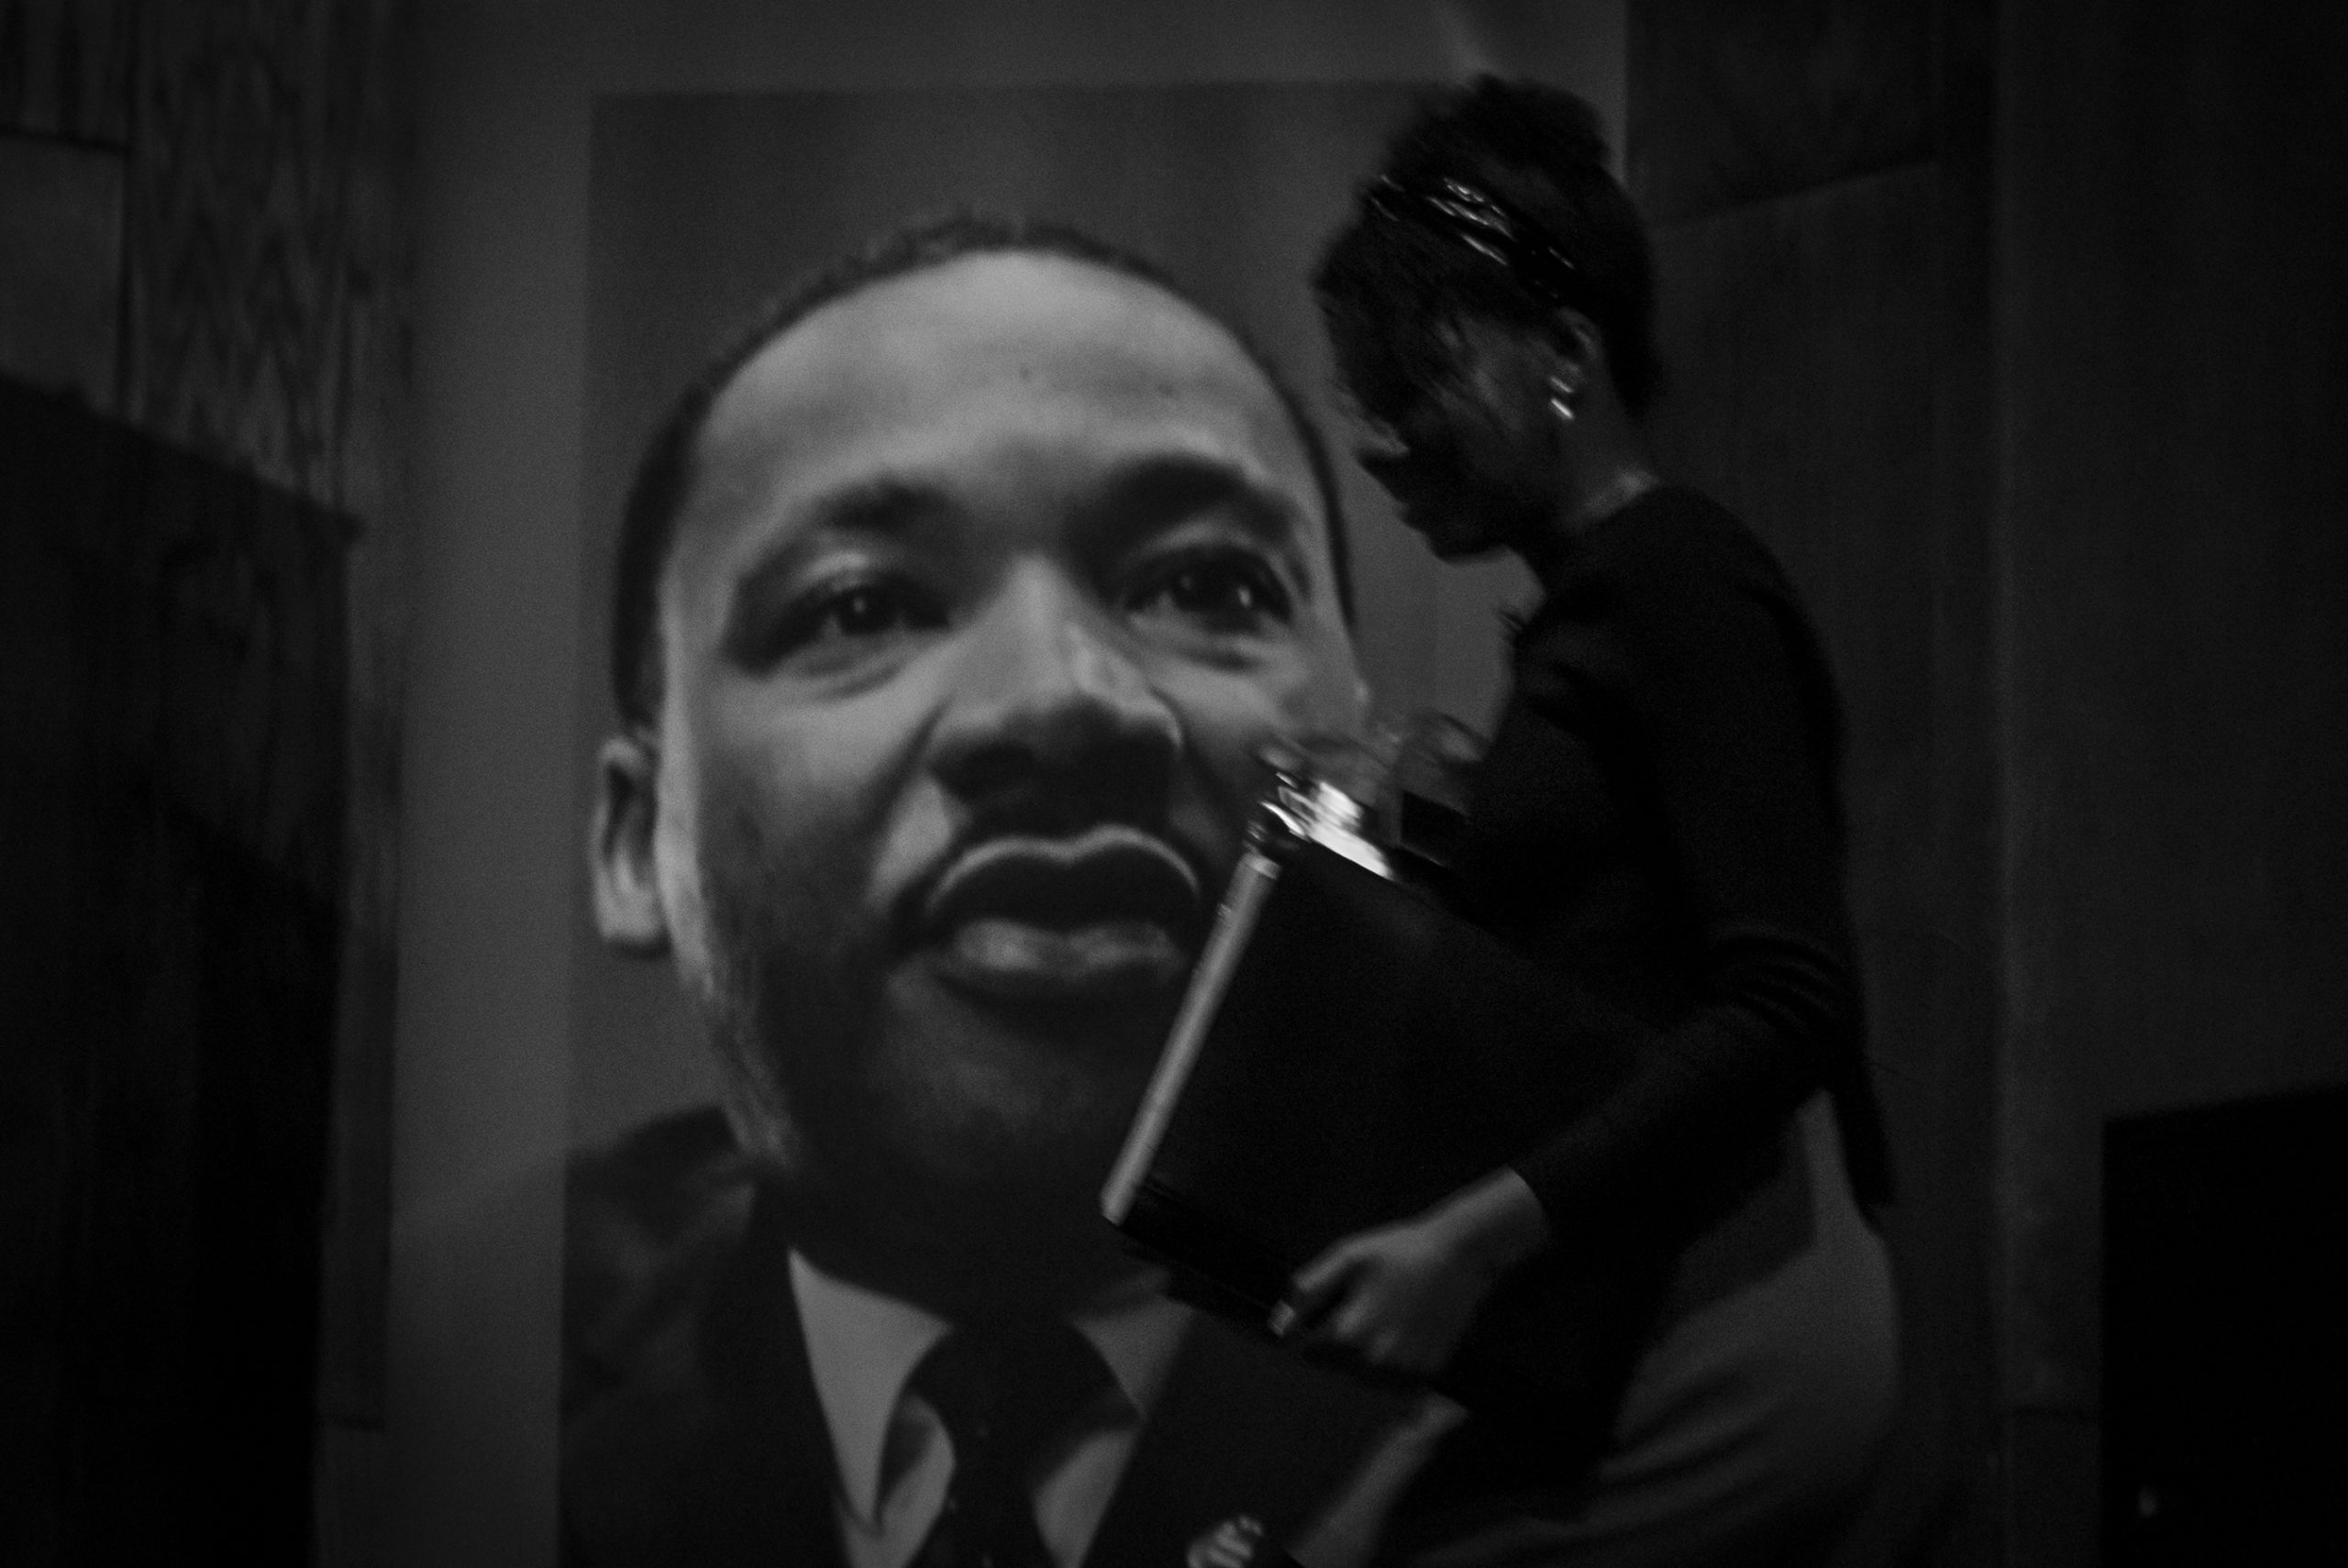 Black and white image of a young woman - Yolanda King - walking past a large poster of MLK.